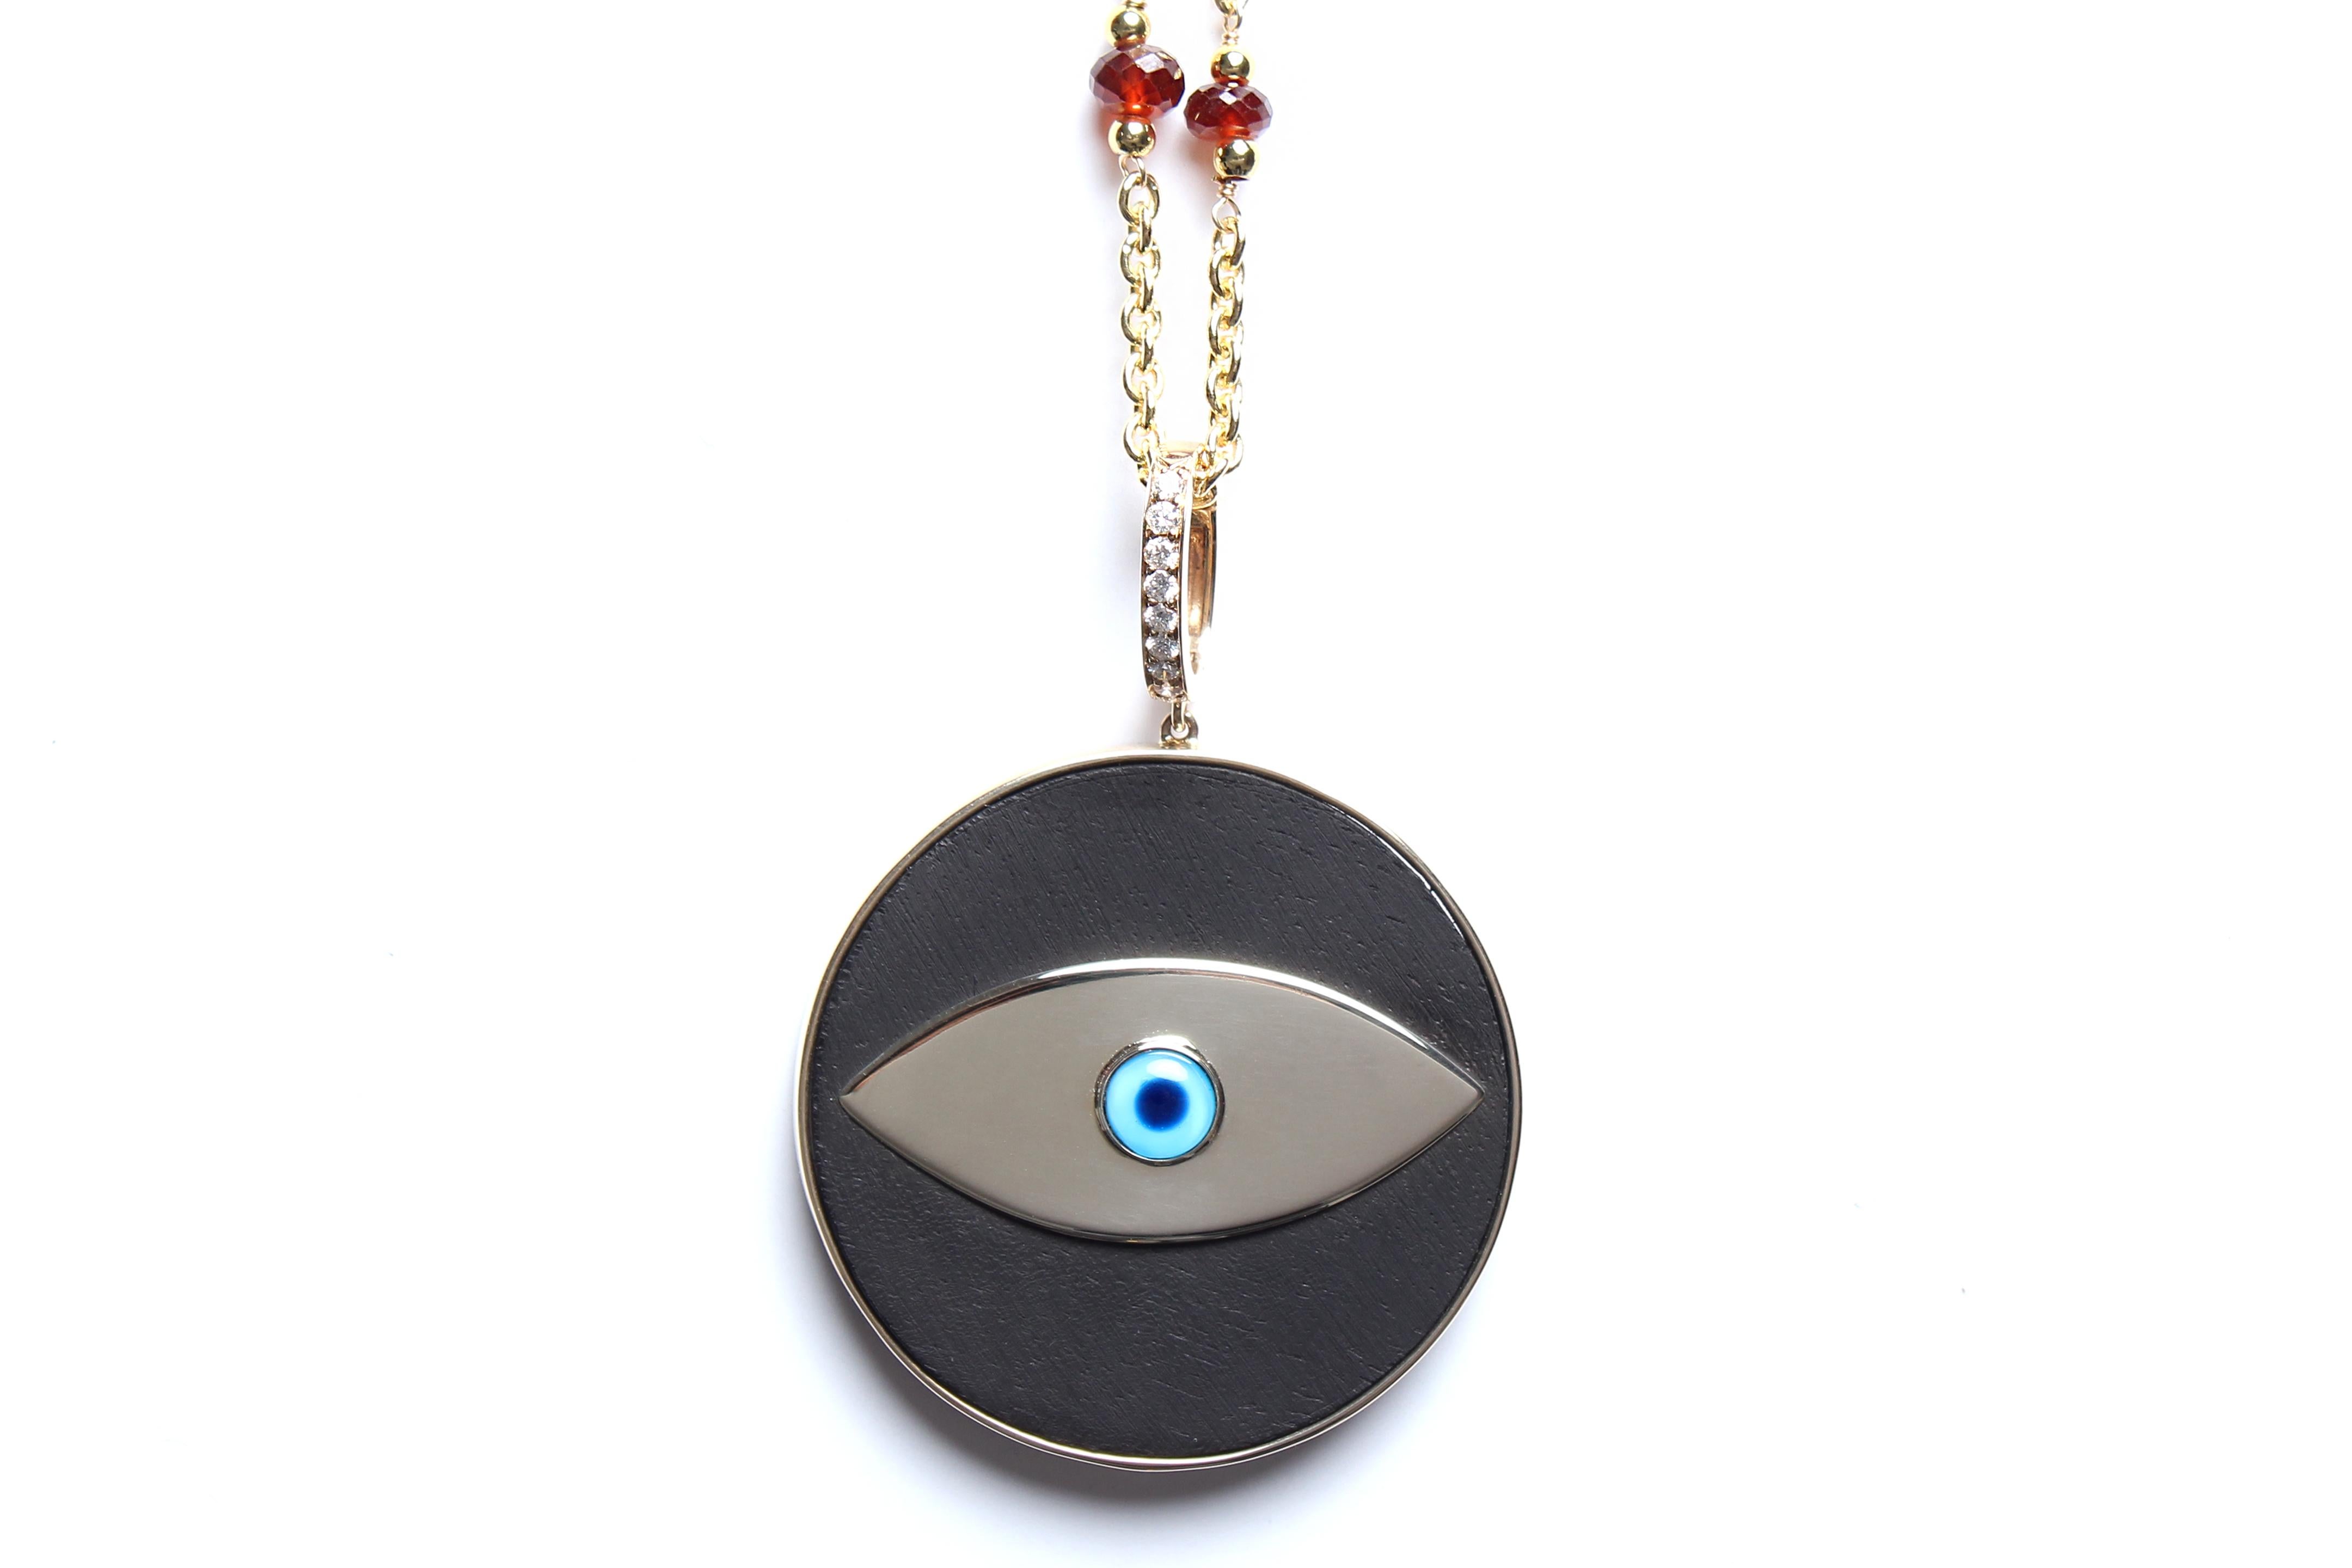 Clarissa Bronfman Signature Ebony Evil Eye Pendant 14k Solid Gold Chain Necklace In New Condition For Sale In New York, NY